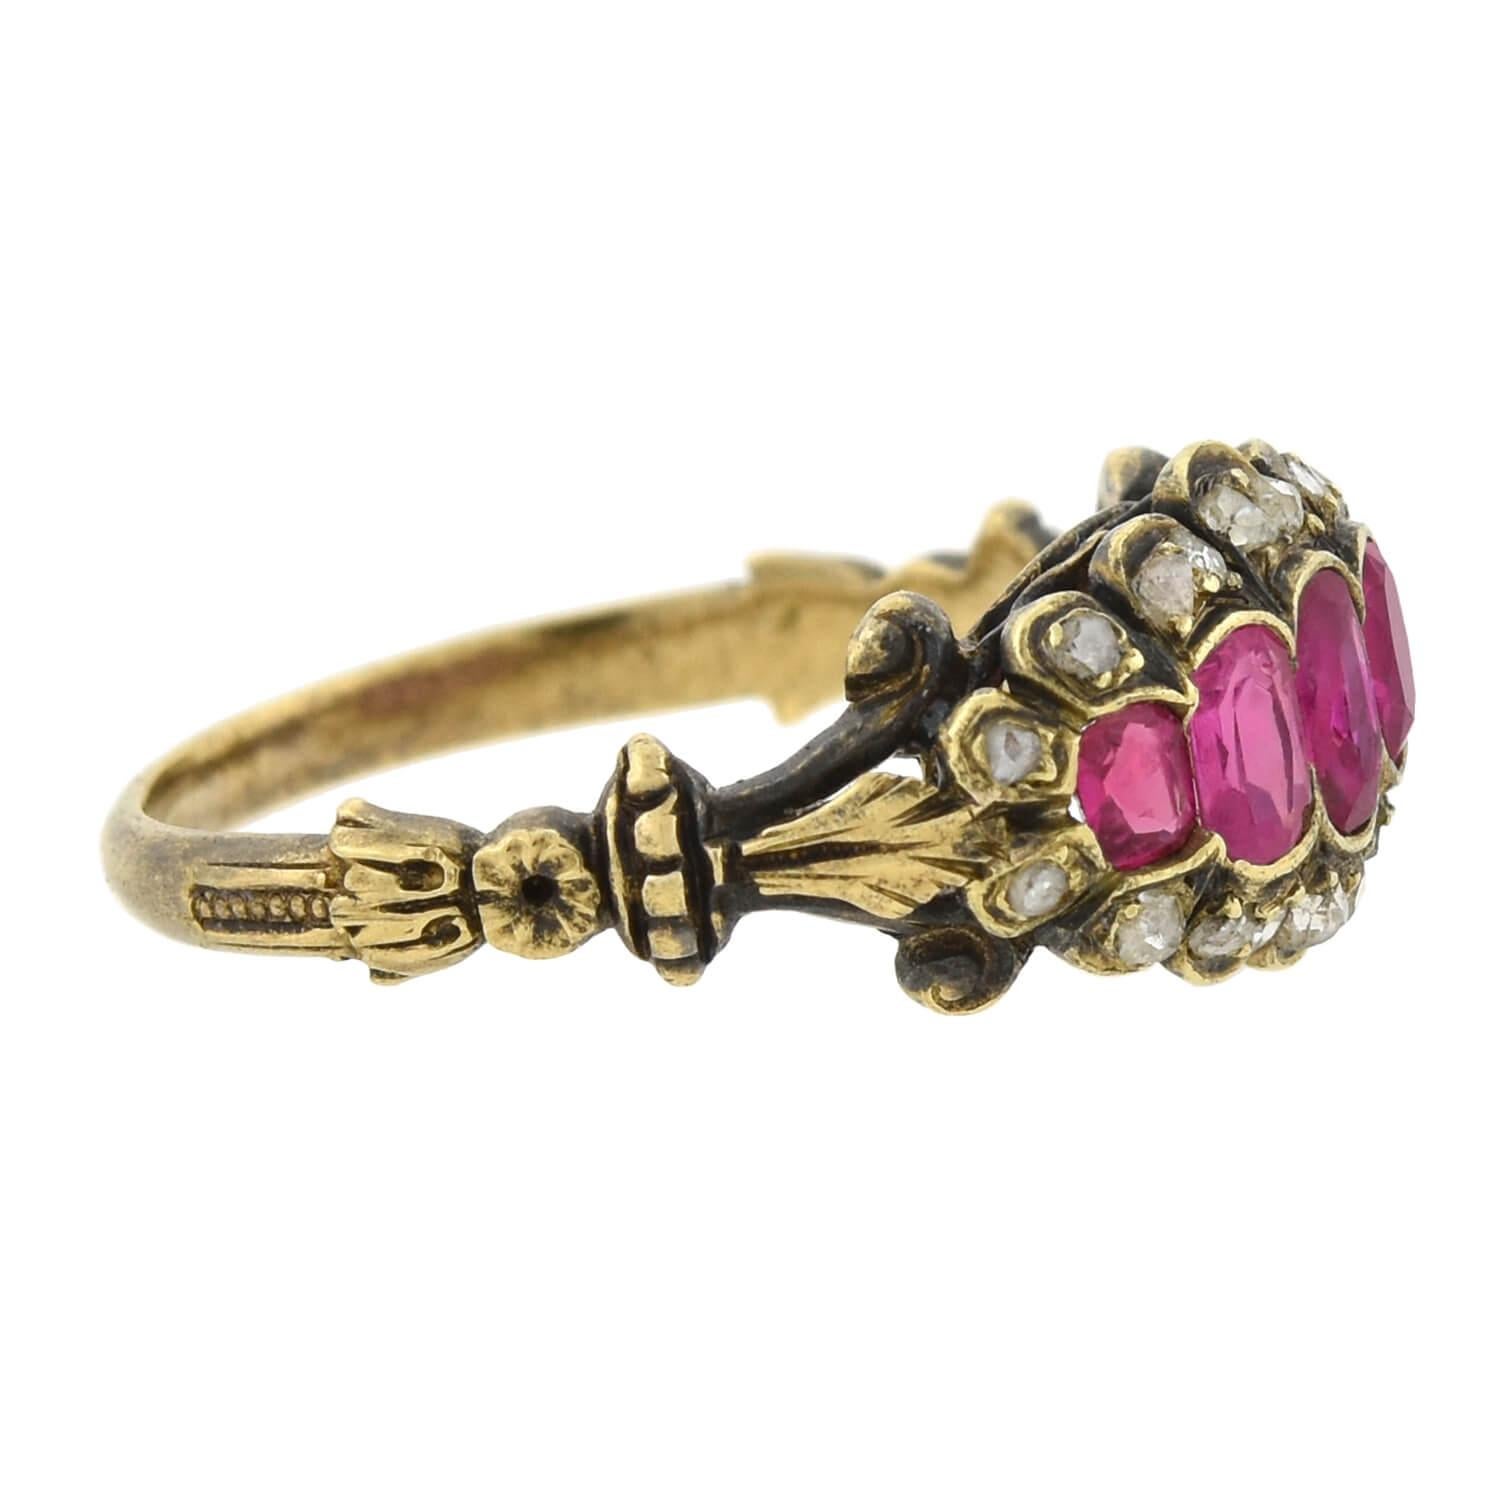 A beautiful gemstone ring from the Victorian (ca1880s) era! This gorgeous piece is crafted in 18kt yellow gold topped with sterling silver and features a beautiful row of luscious rubies and sparkling diamonds across the front. Set along the center